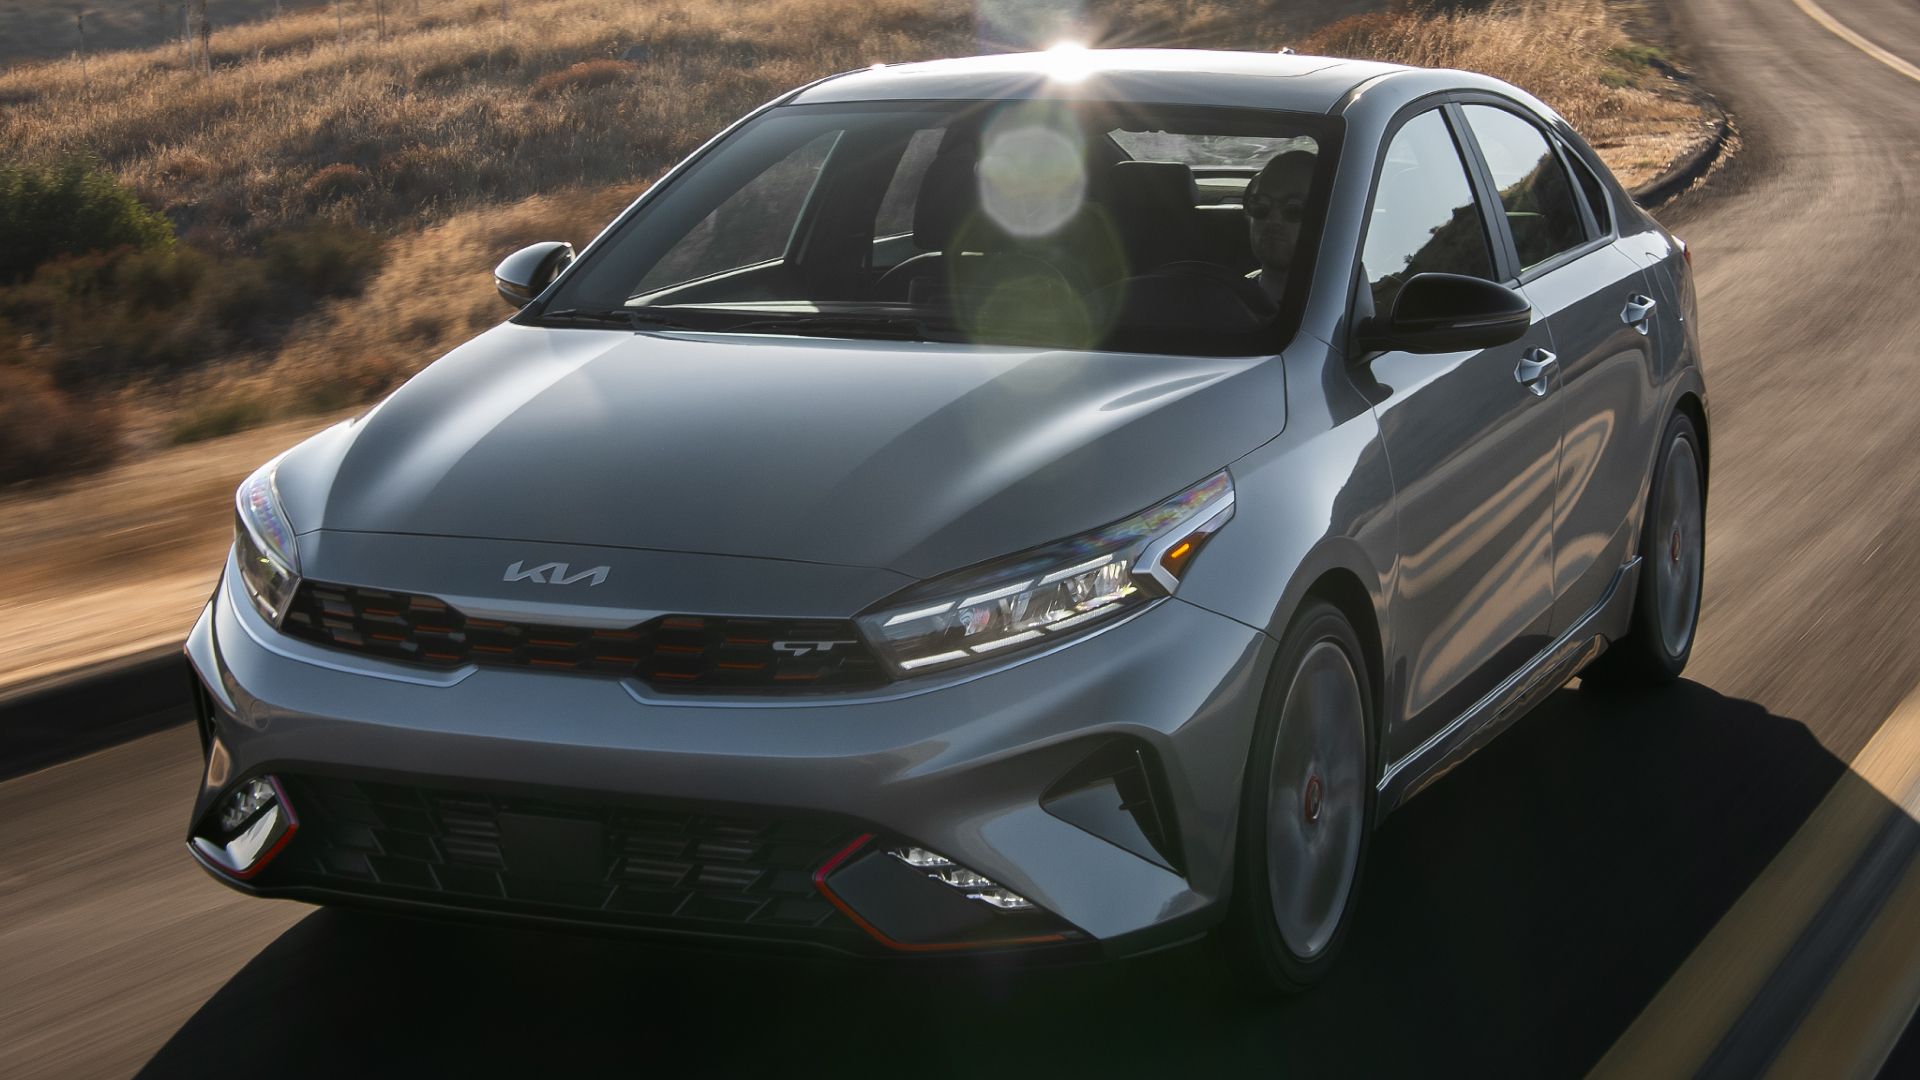 2024 Kia Sedan Lineup: Models, Pricing, Features, And Performance